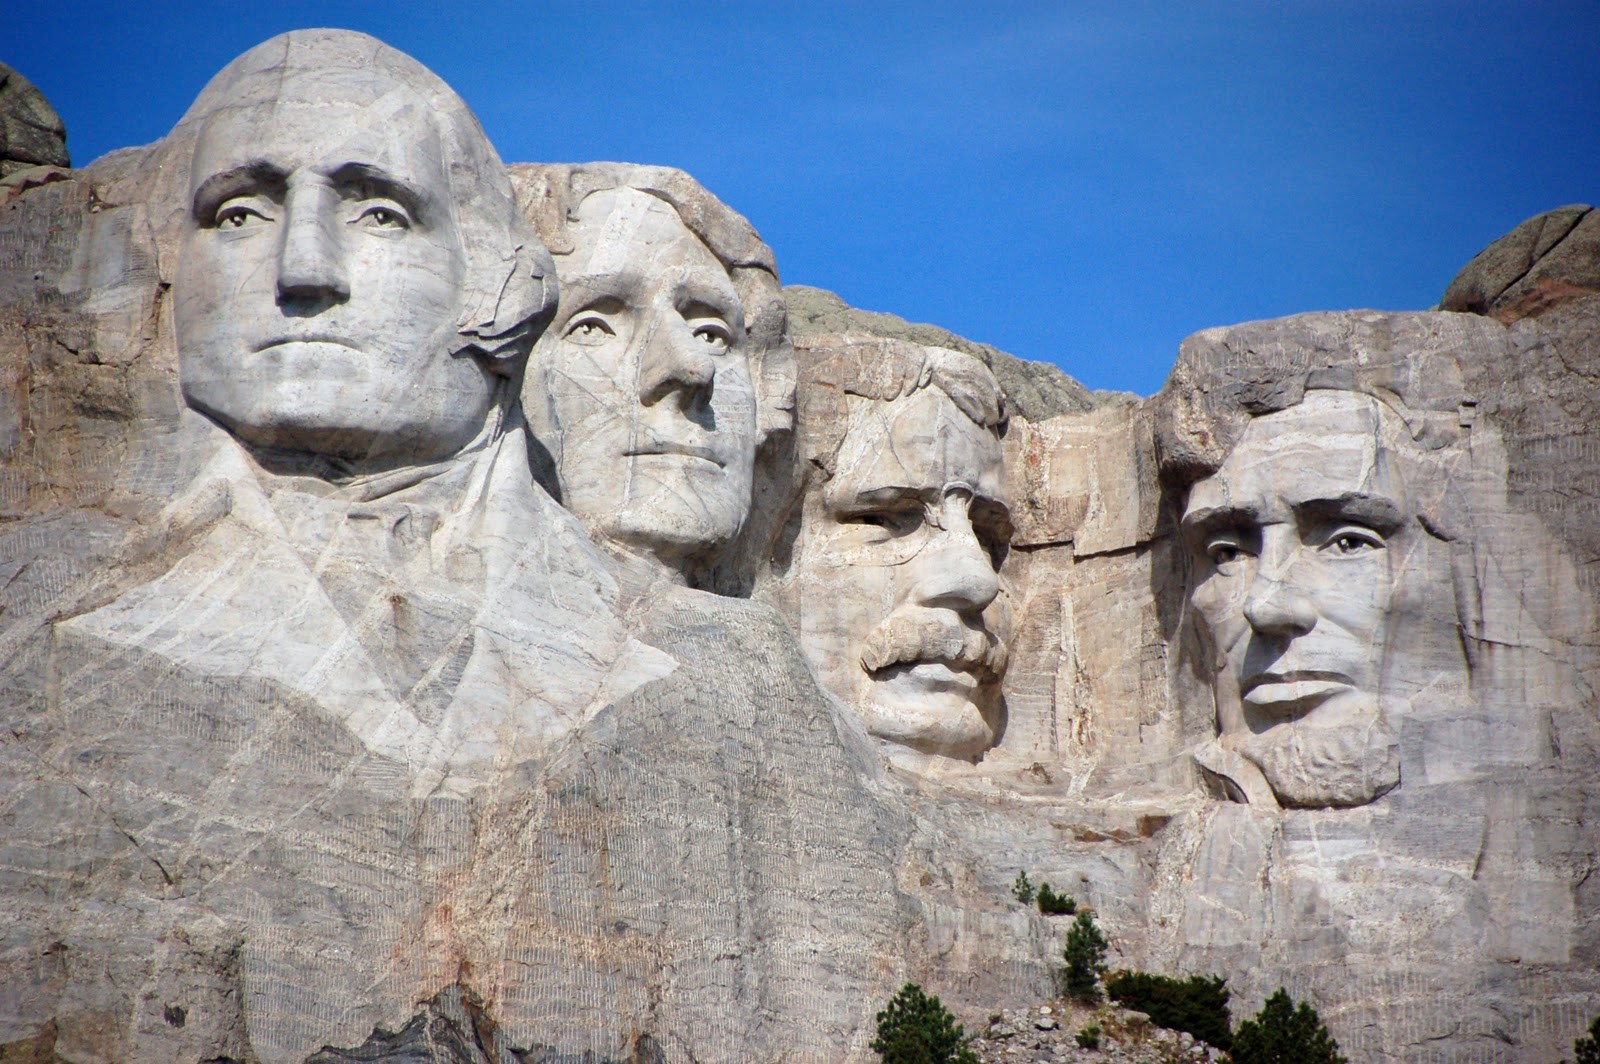 Hey, We Bet You Can’t Get Better Than 80% On This Random Knowledge Quiz Presidents Day, Mount Rushmore, South Dakota